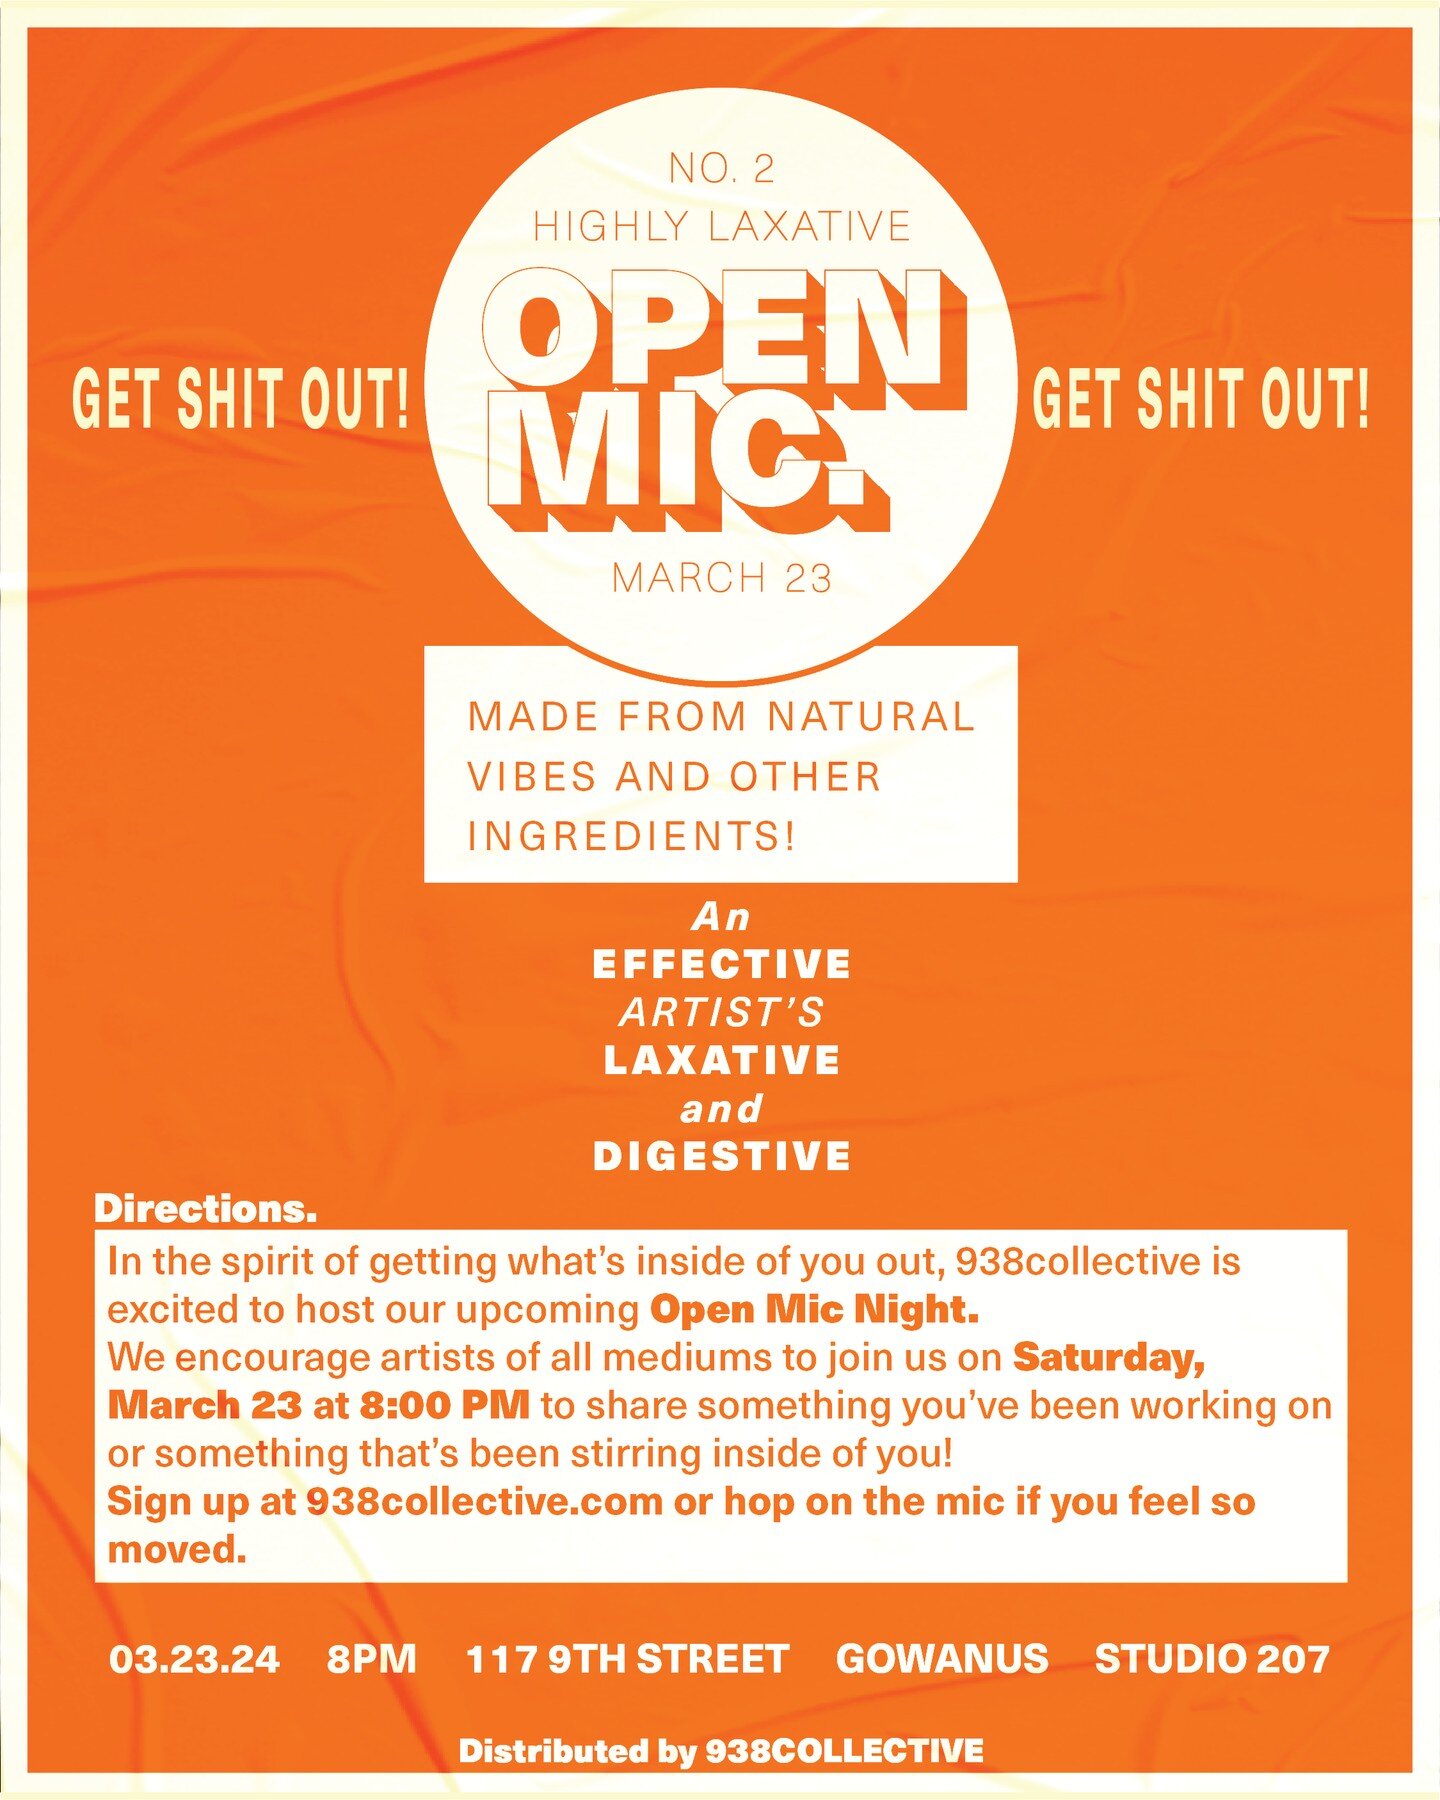 are you constipated too or is it just me ?

clogged up with art? lyrics? poems? beats? do we have a remedy for you &gt;&gt; 938collective's Artist Laxative Open Mic ~ where you can ᵍ ᵉ ᵗ ˢ ʰ ⁱ ᵗ ᵒ ᵘᵗ

sign up @ 938collective.com ~ or the mic's always